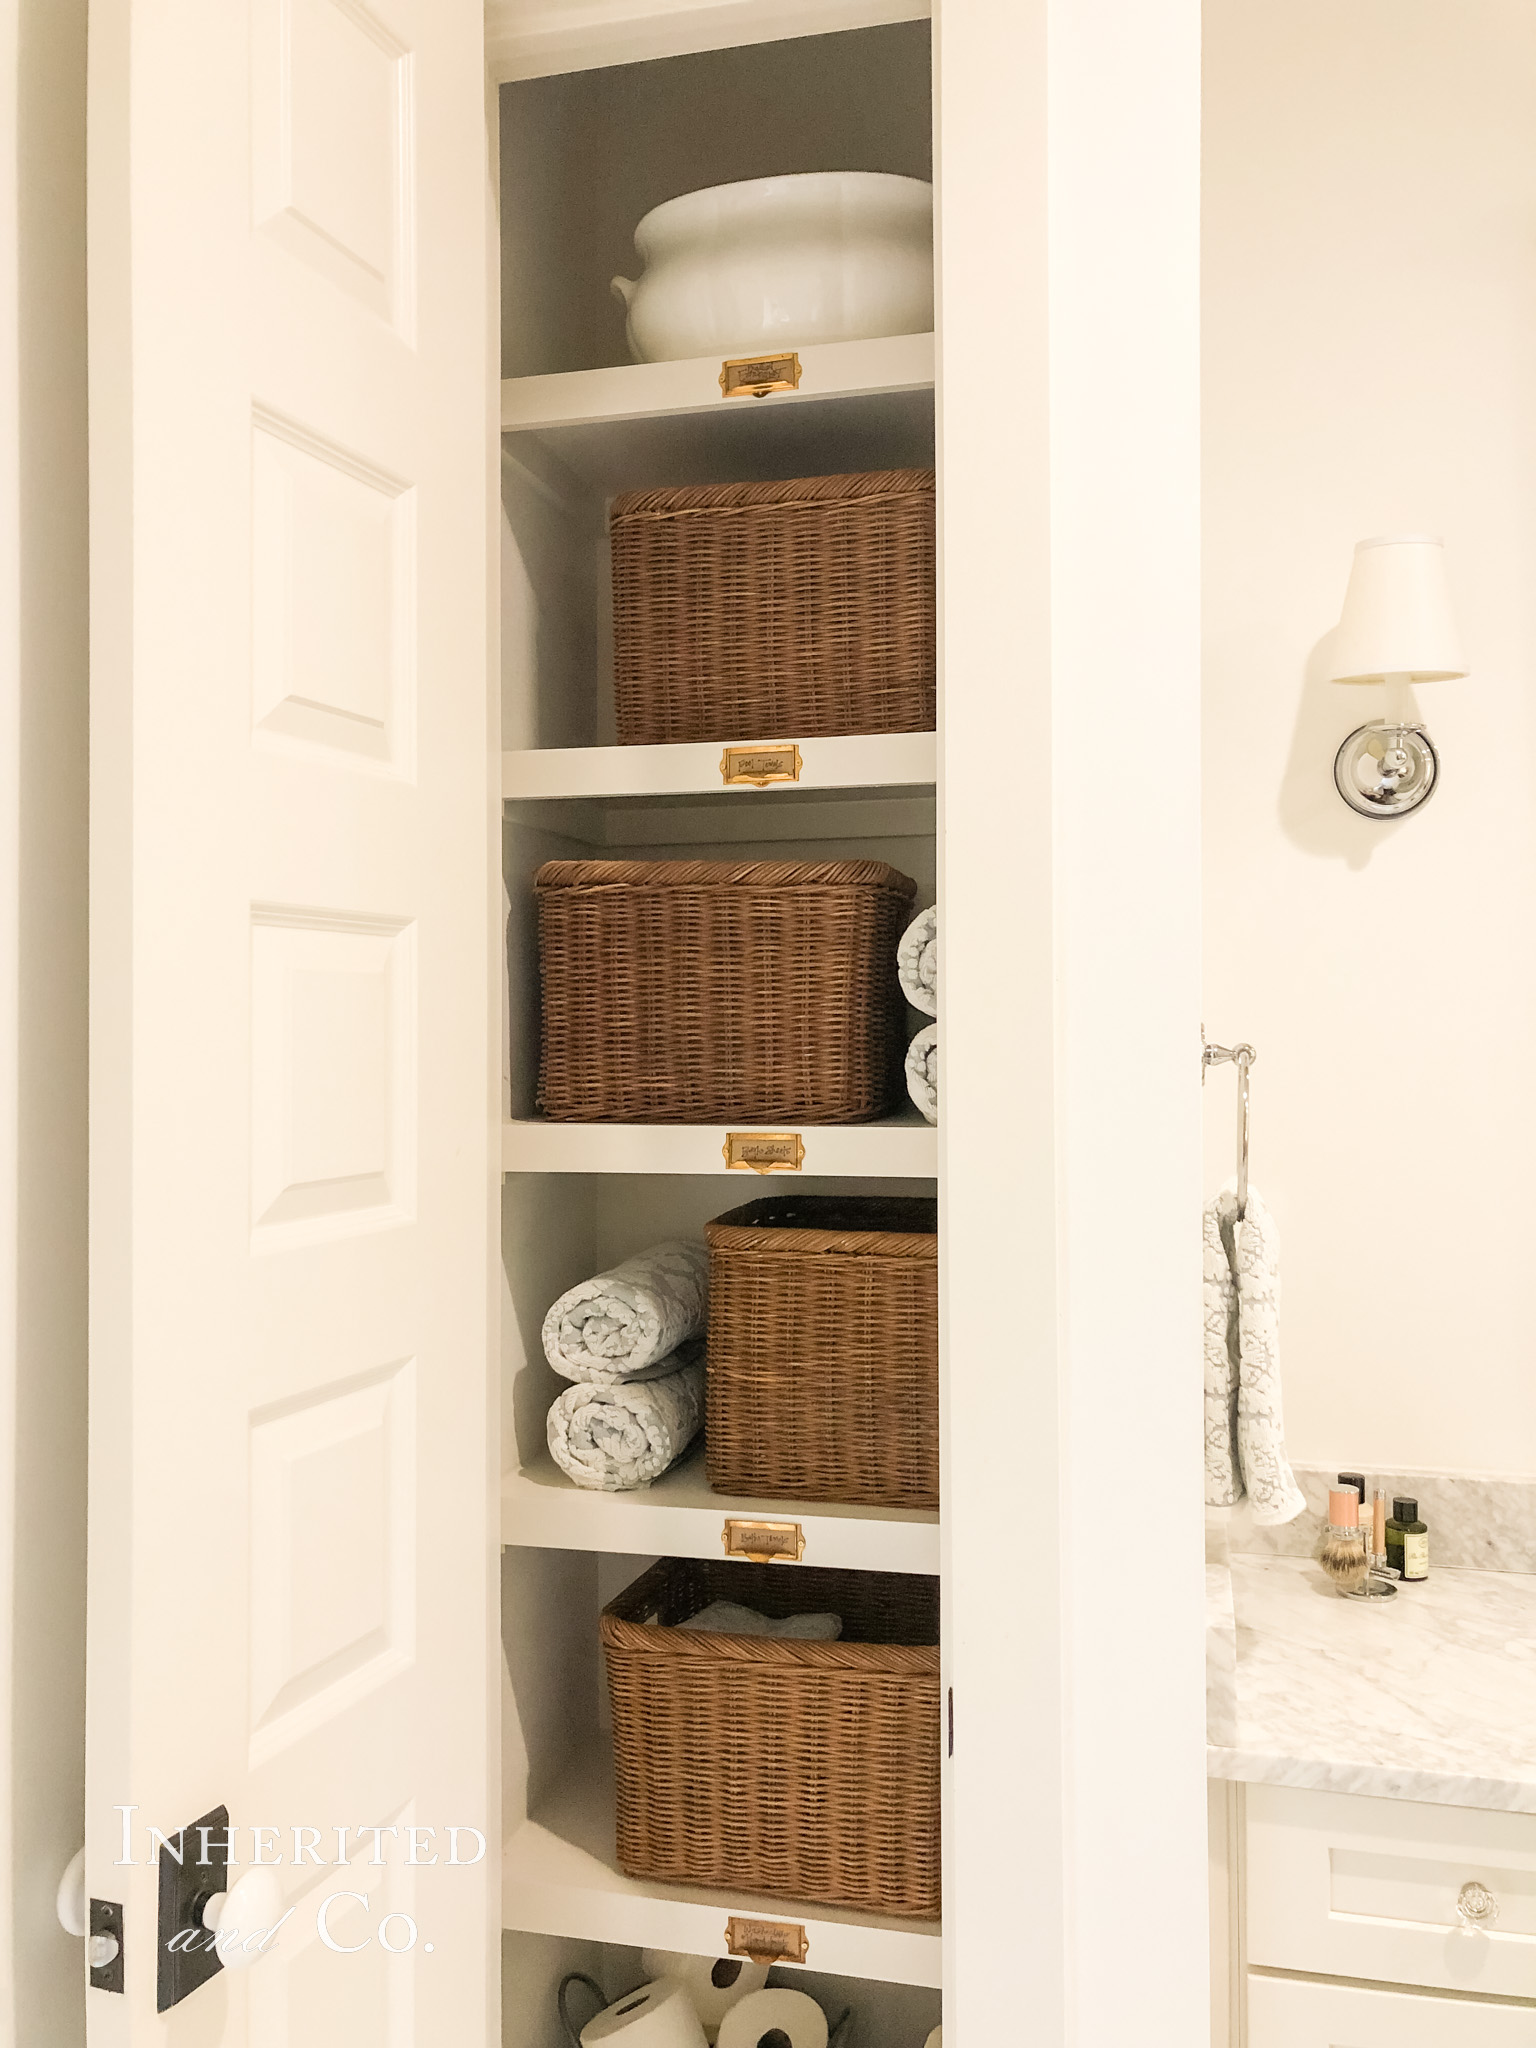 Top shelves in a towel closet, featuring an ironstone footbath and baskets